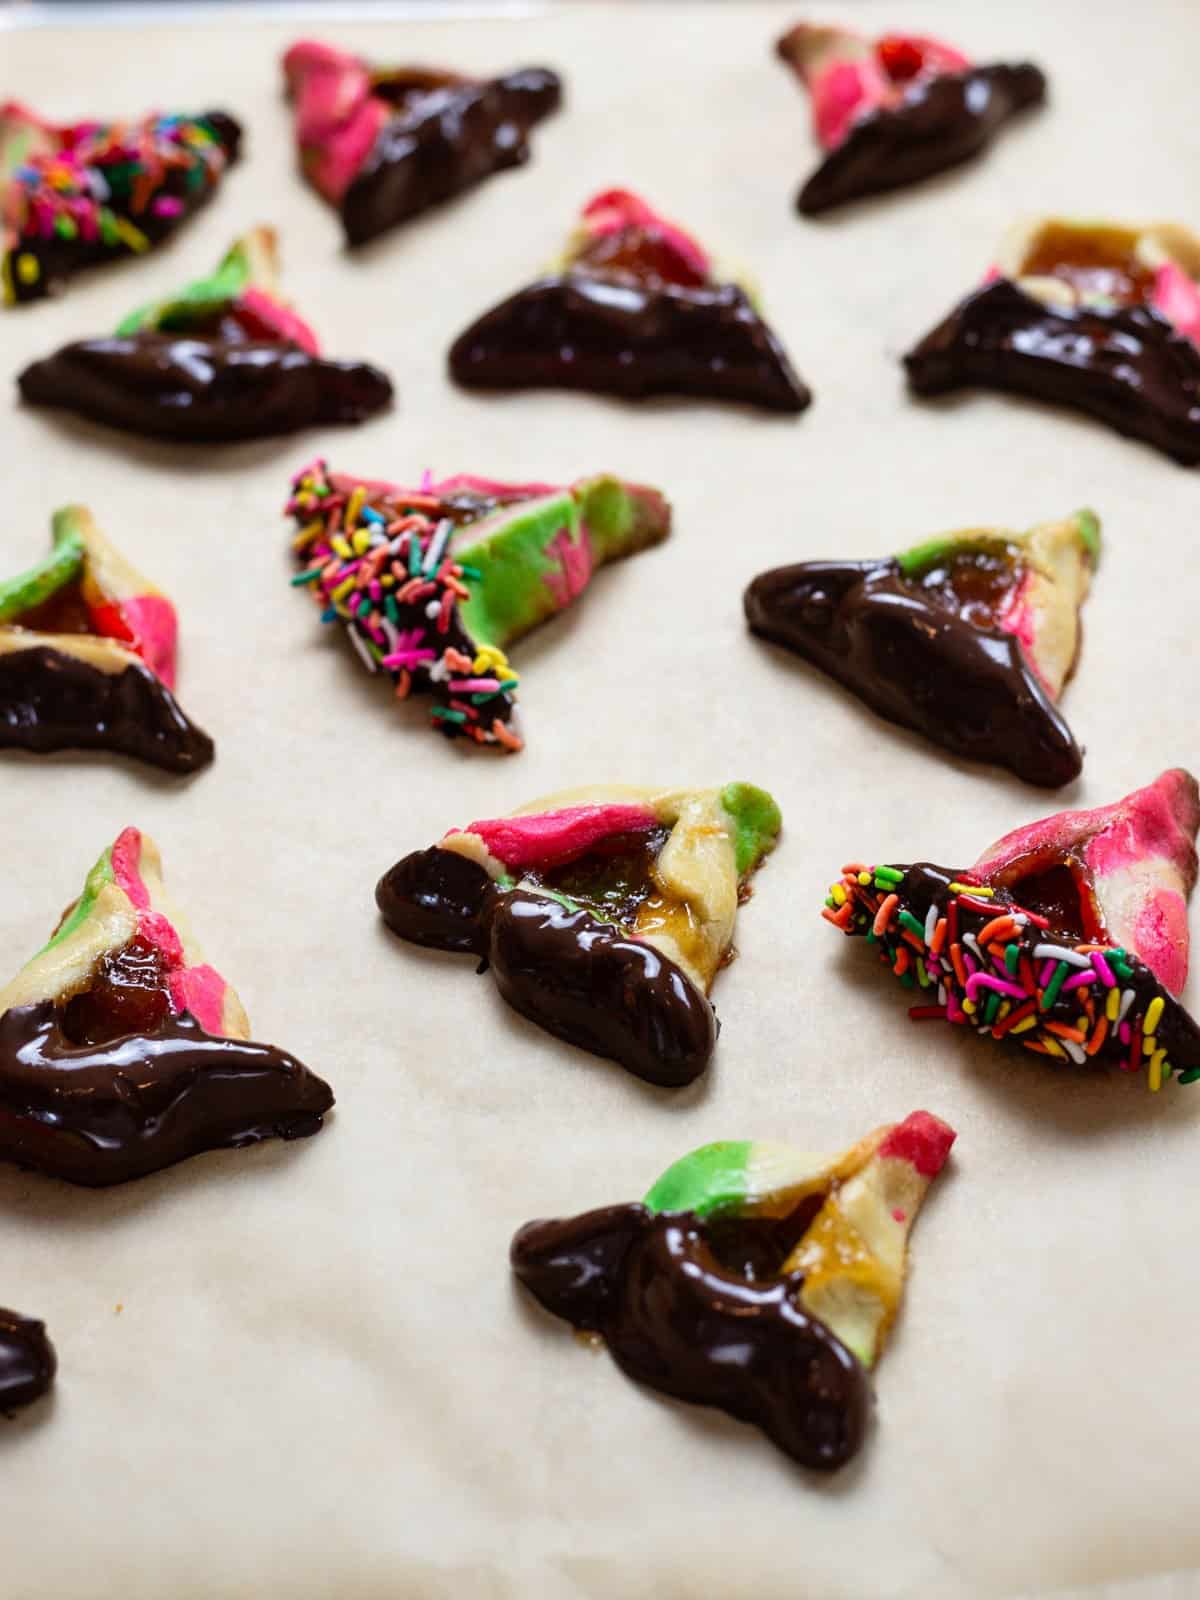 Baked rainbow hamantaschen cookies dipped in chocolate.